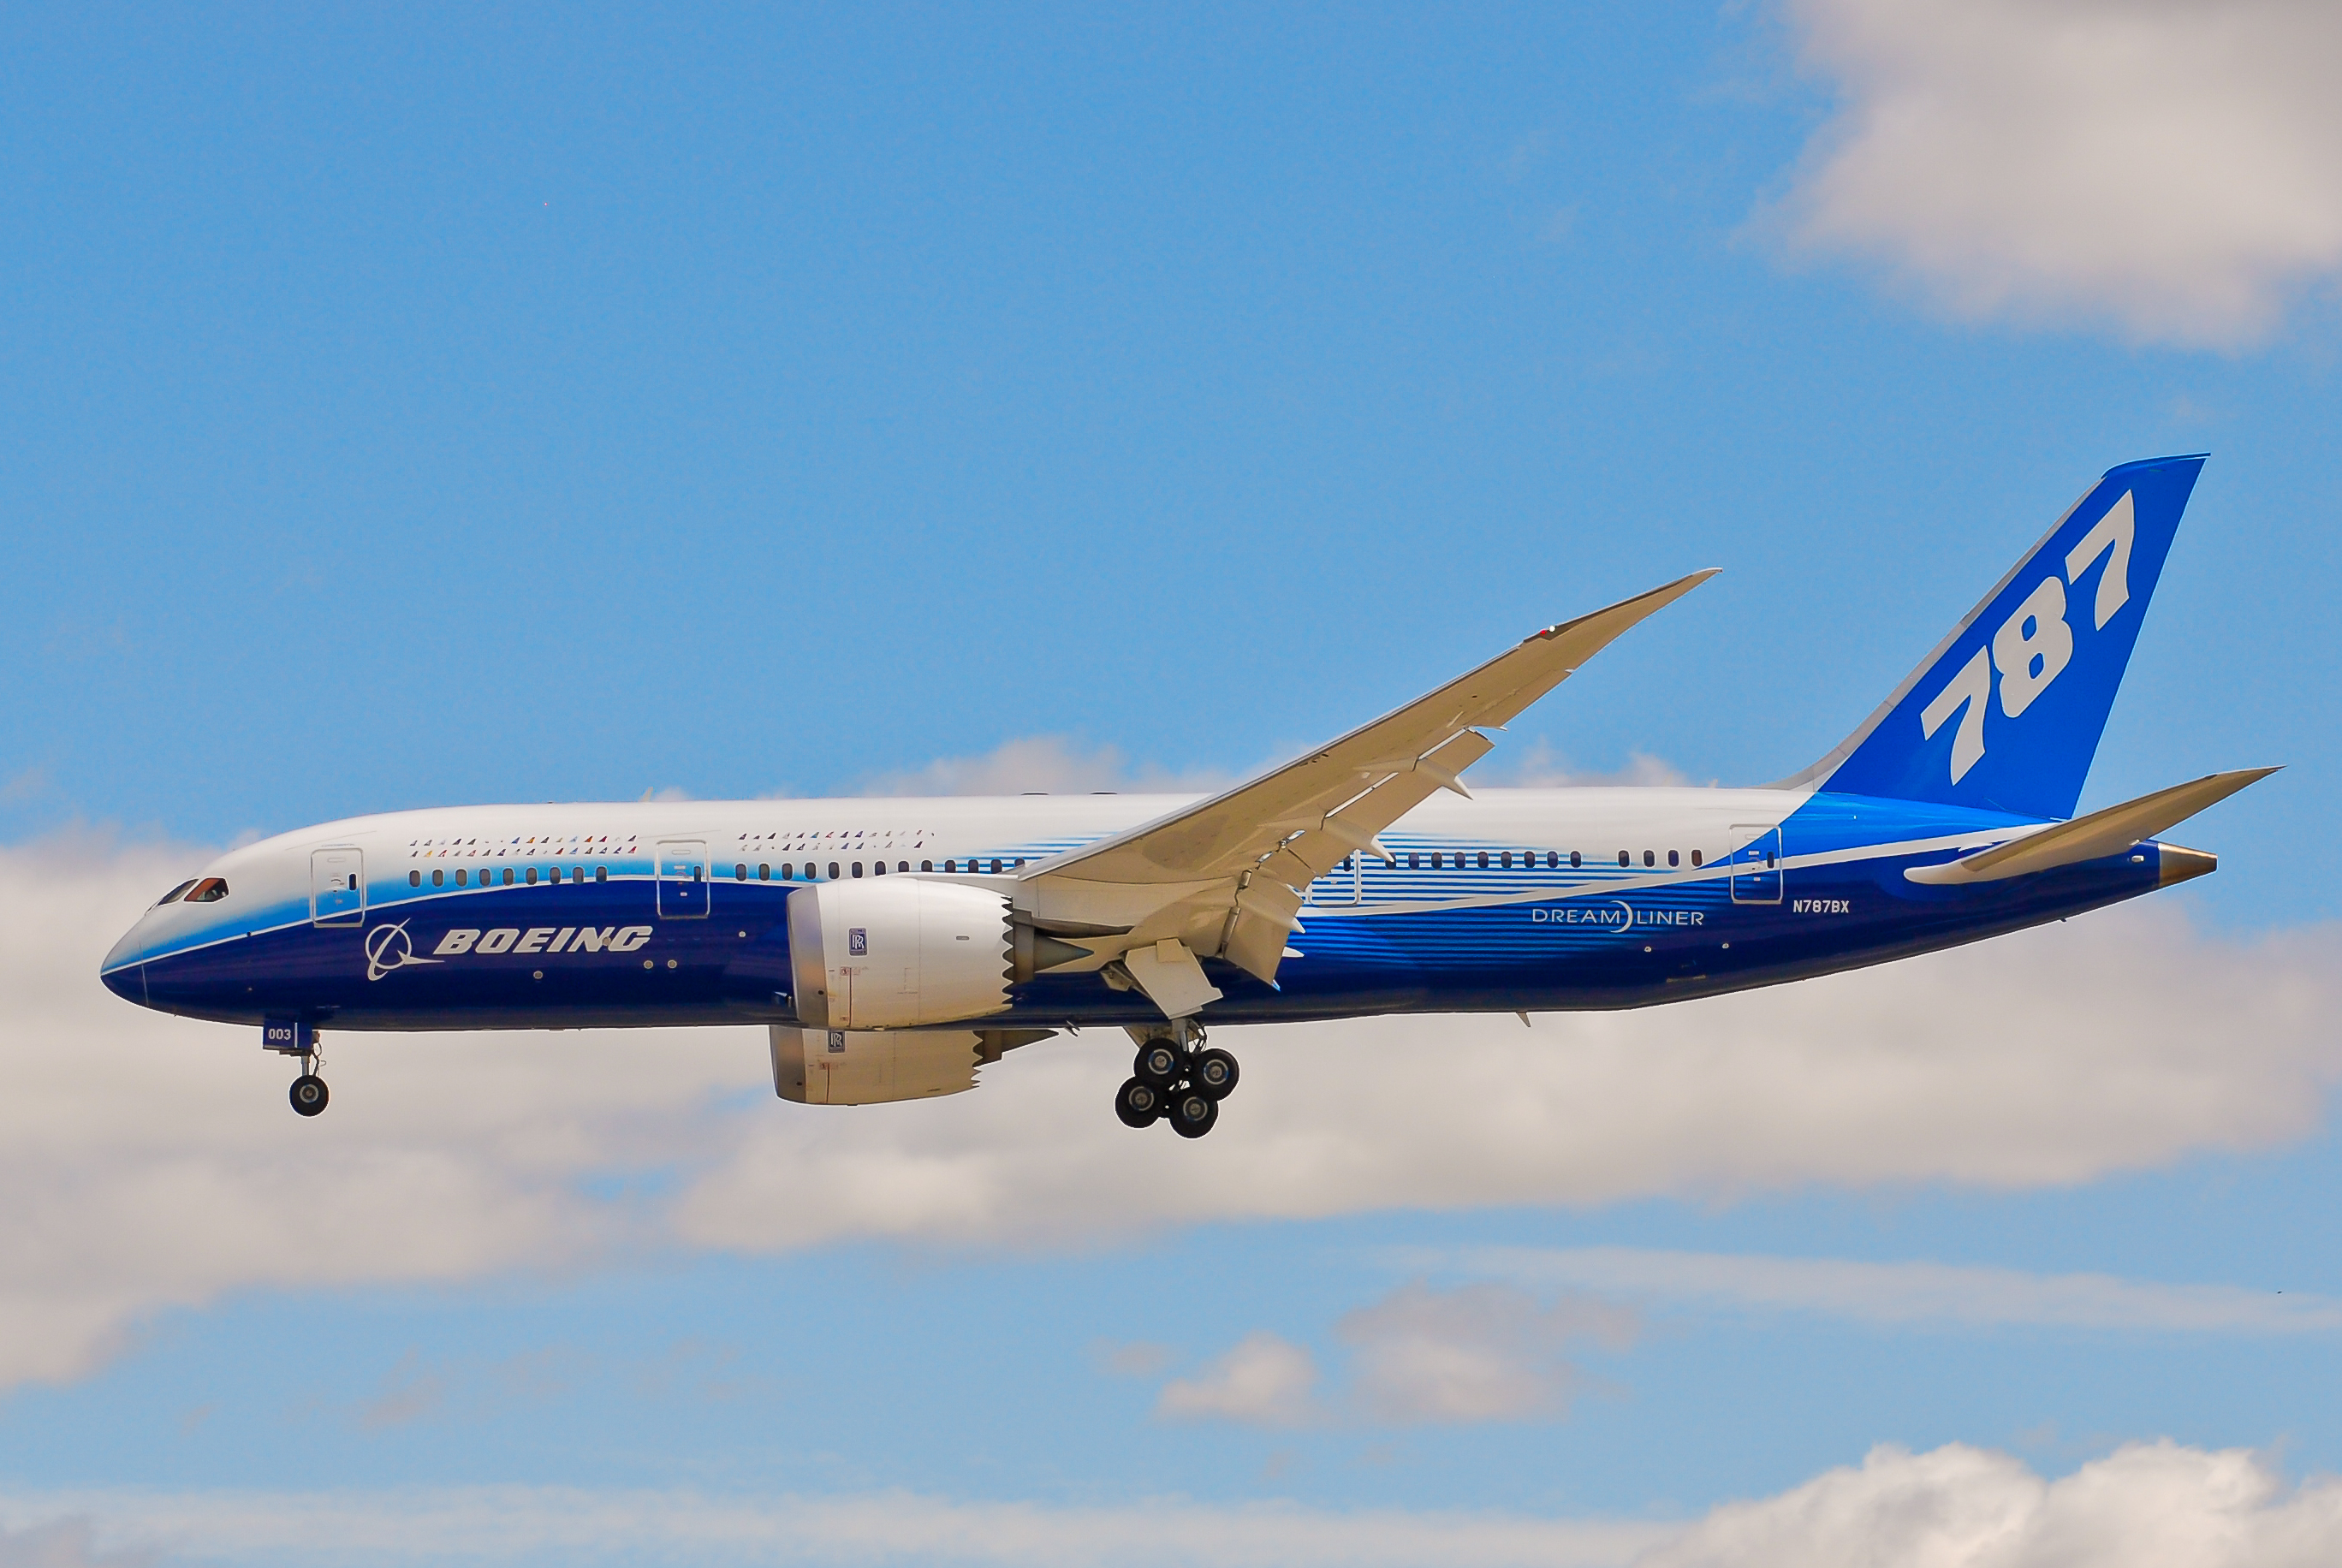 Boeing 787 Dreamliner Backgrounds, Compatible - PC, Mobile, Gadgets| 2736x1832 px